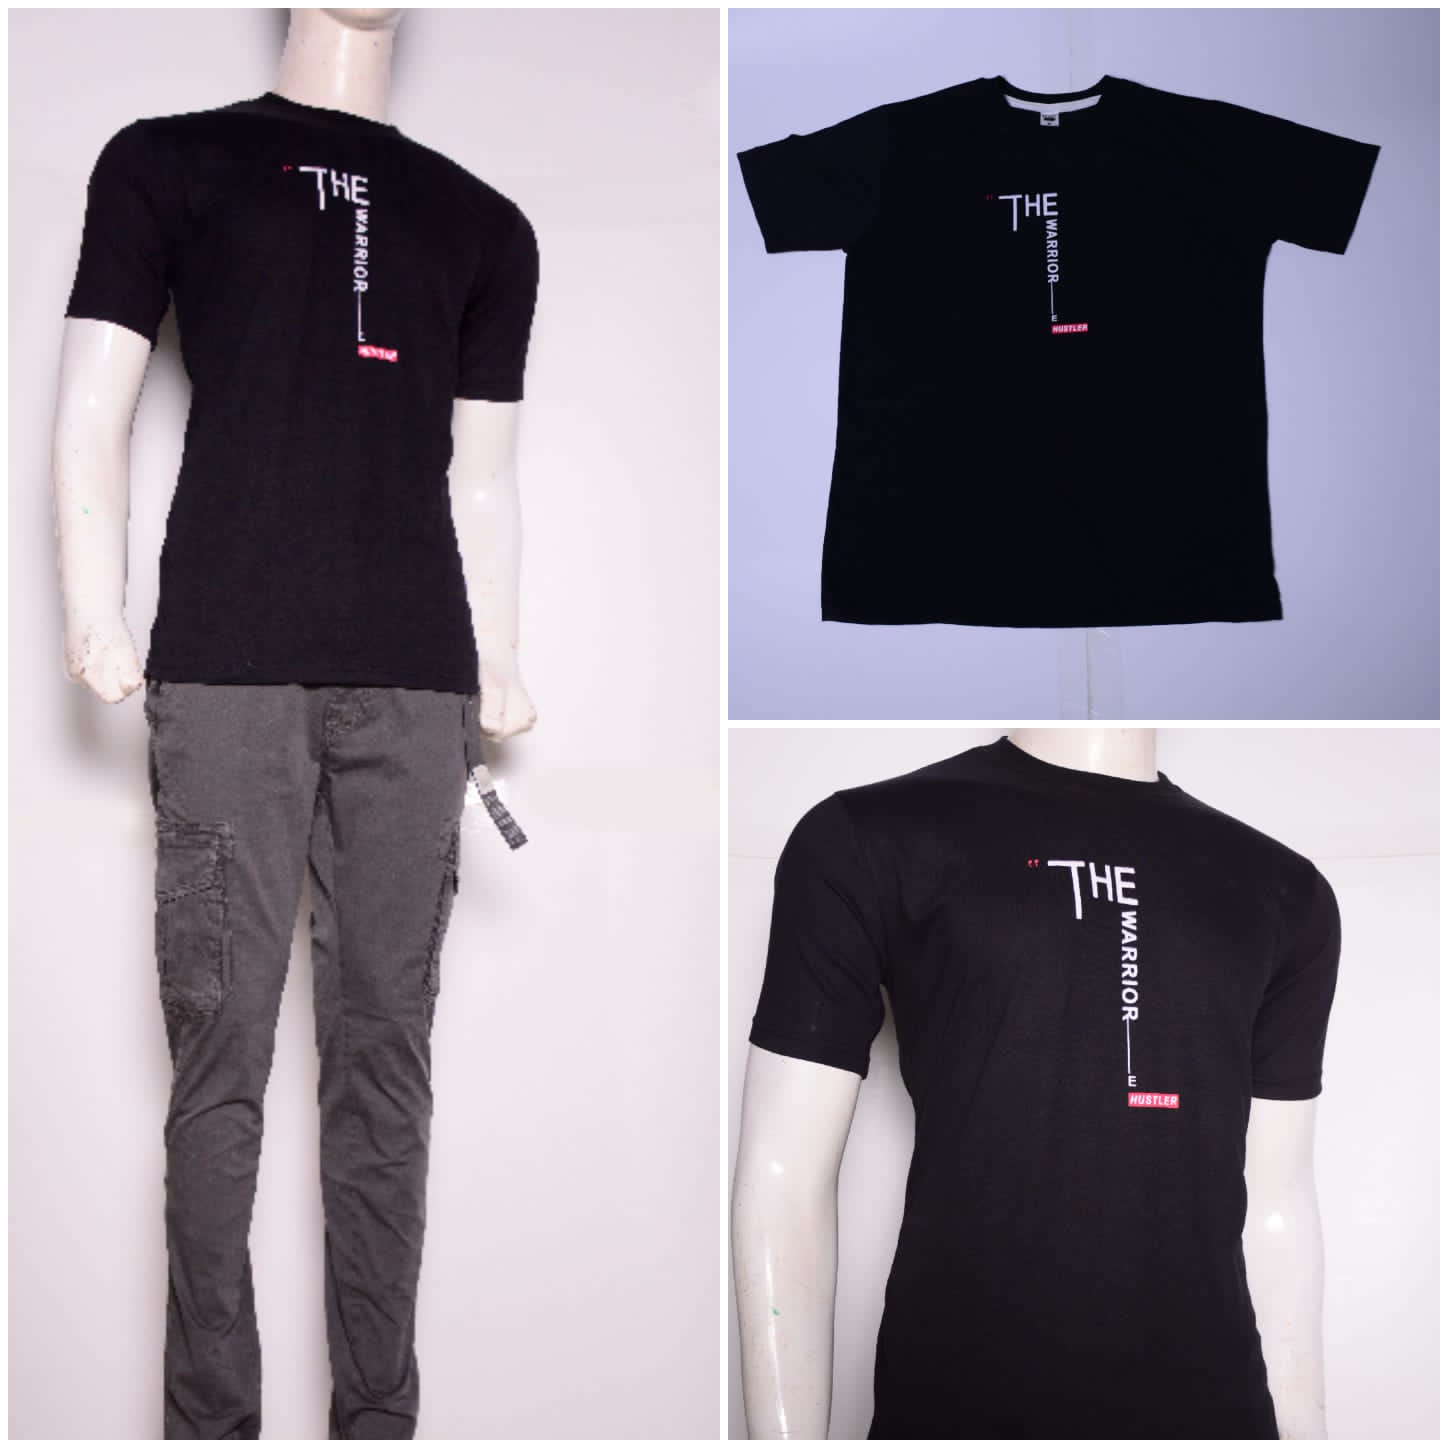 The Worrier T-Shirt in Black Color